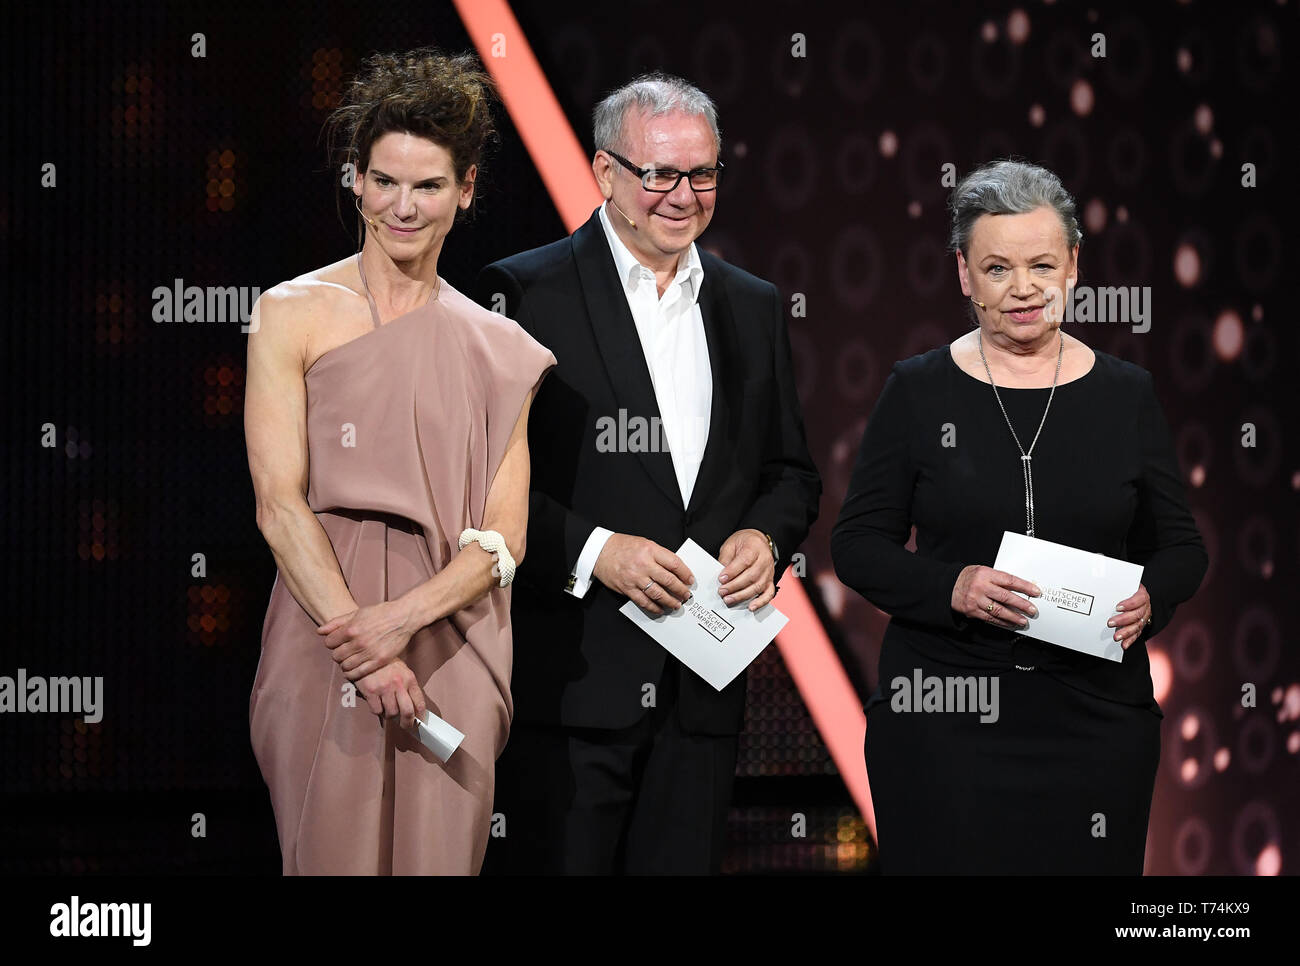 Berlin, Germany. 03rd May, 2019. The actors Ursula Werner (r), Bibiana Beglau and Joachim Krol, give the laudatio in the category 'Best Director' at the 69th German Film Award 'Lola'. Credit: Britta Pedersen/dpa-Zentralbild/dpa/Alamy Live News Stock Photo